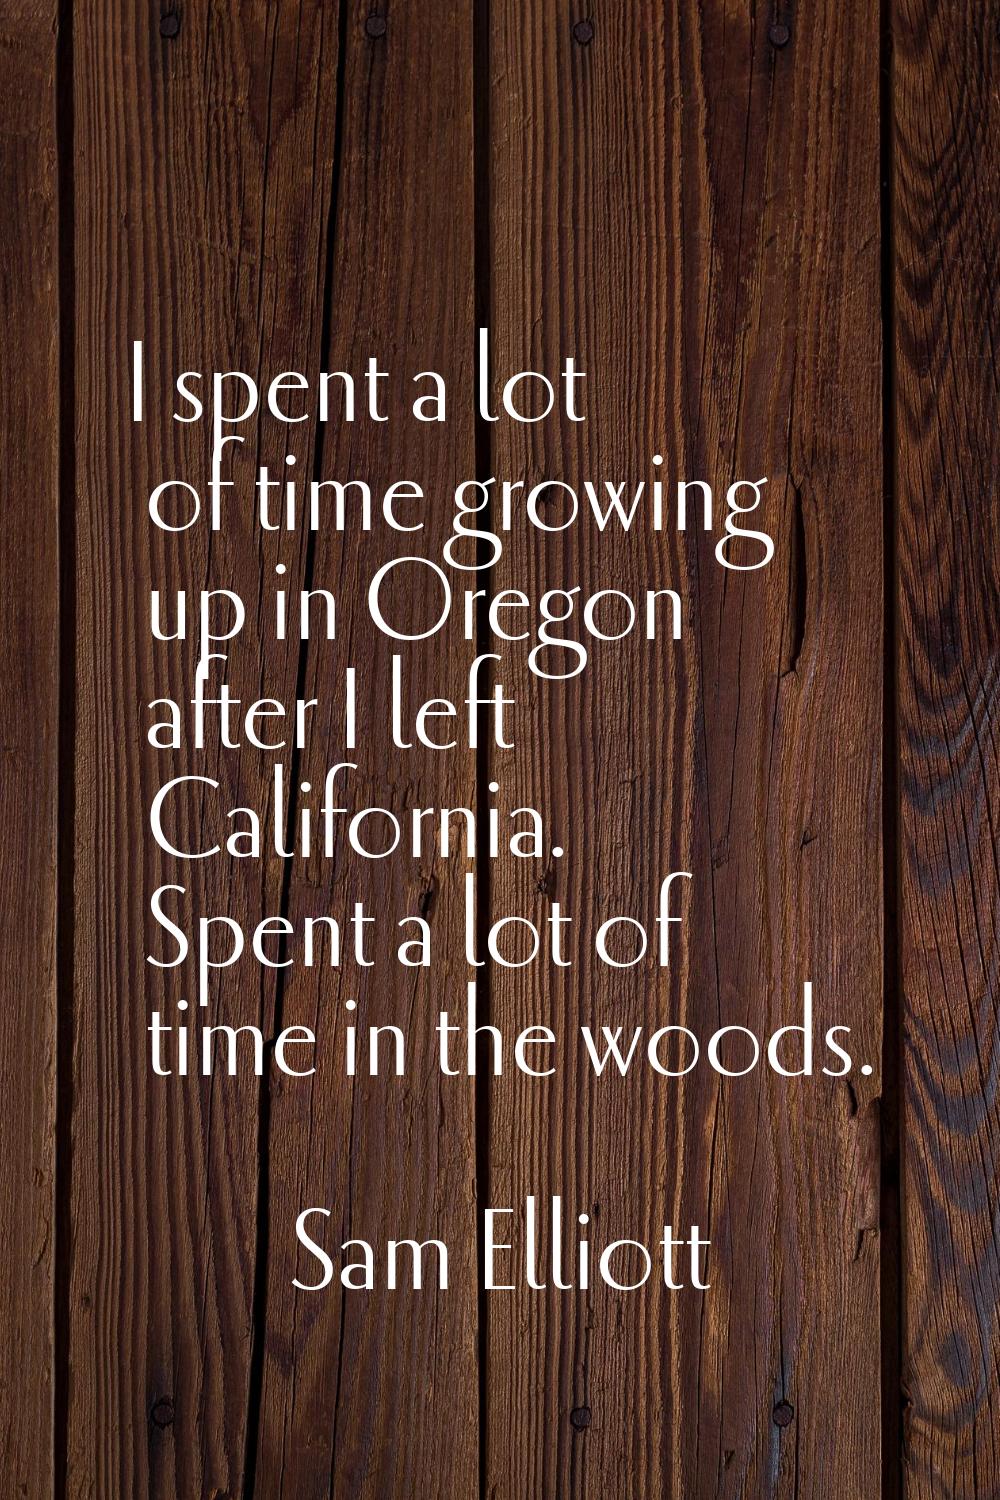 I spent a lot of time growing up in Oregon after I left California. Spent a lot of time in the wood